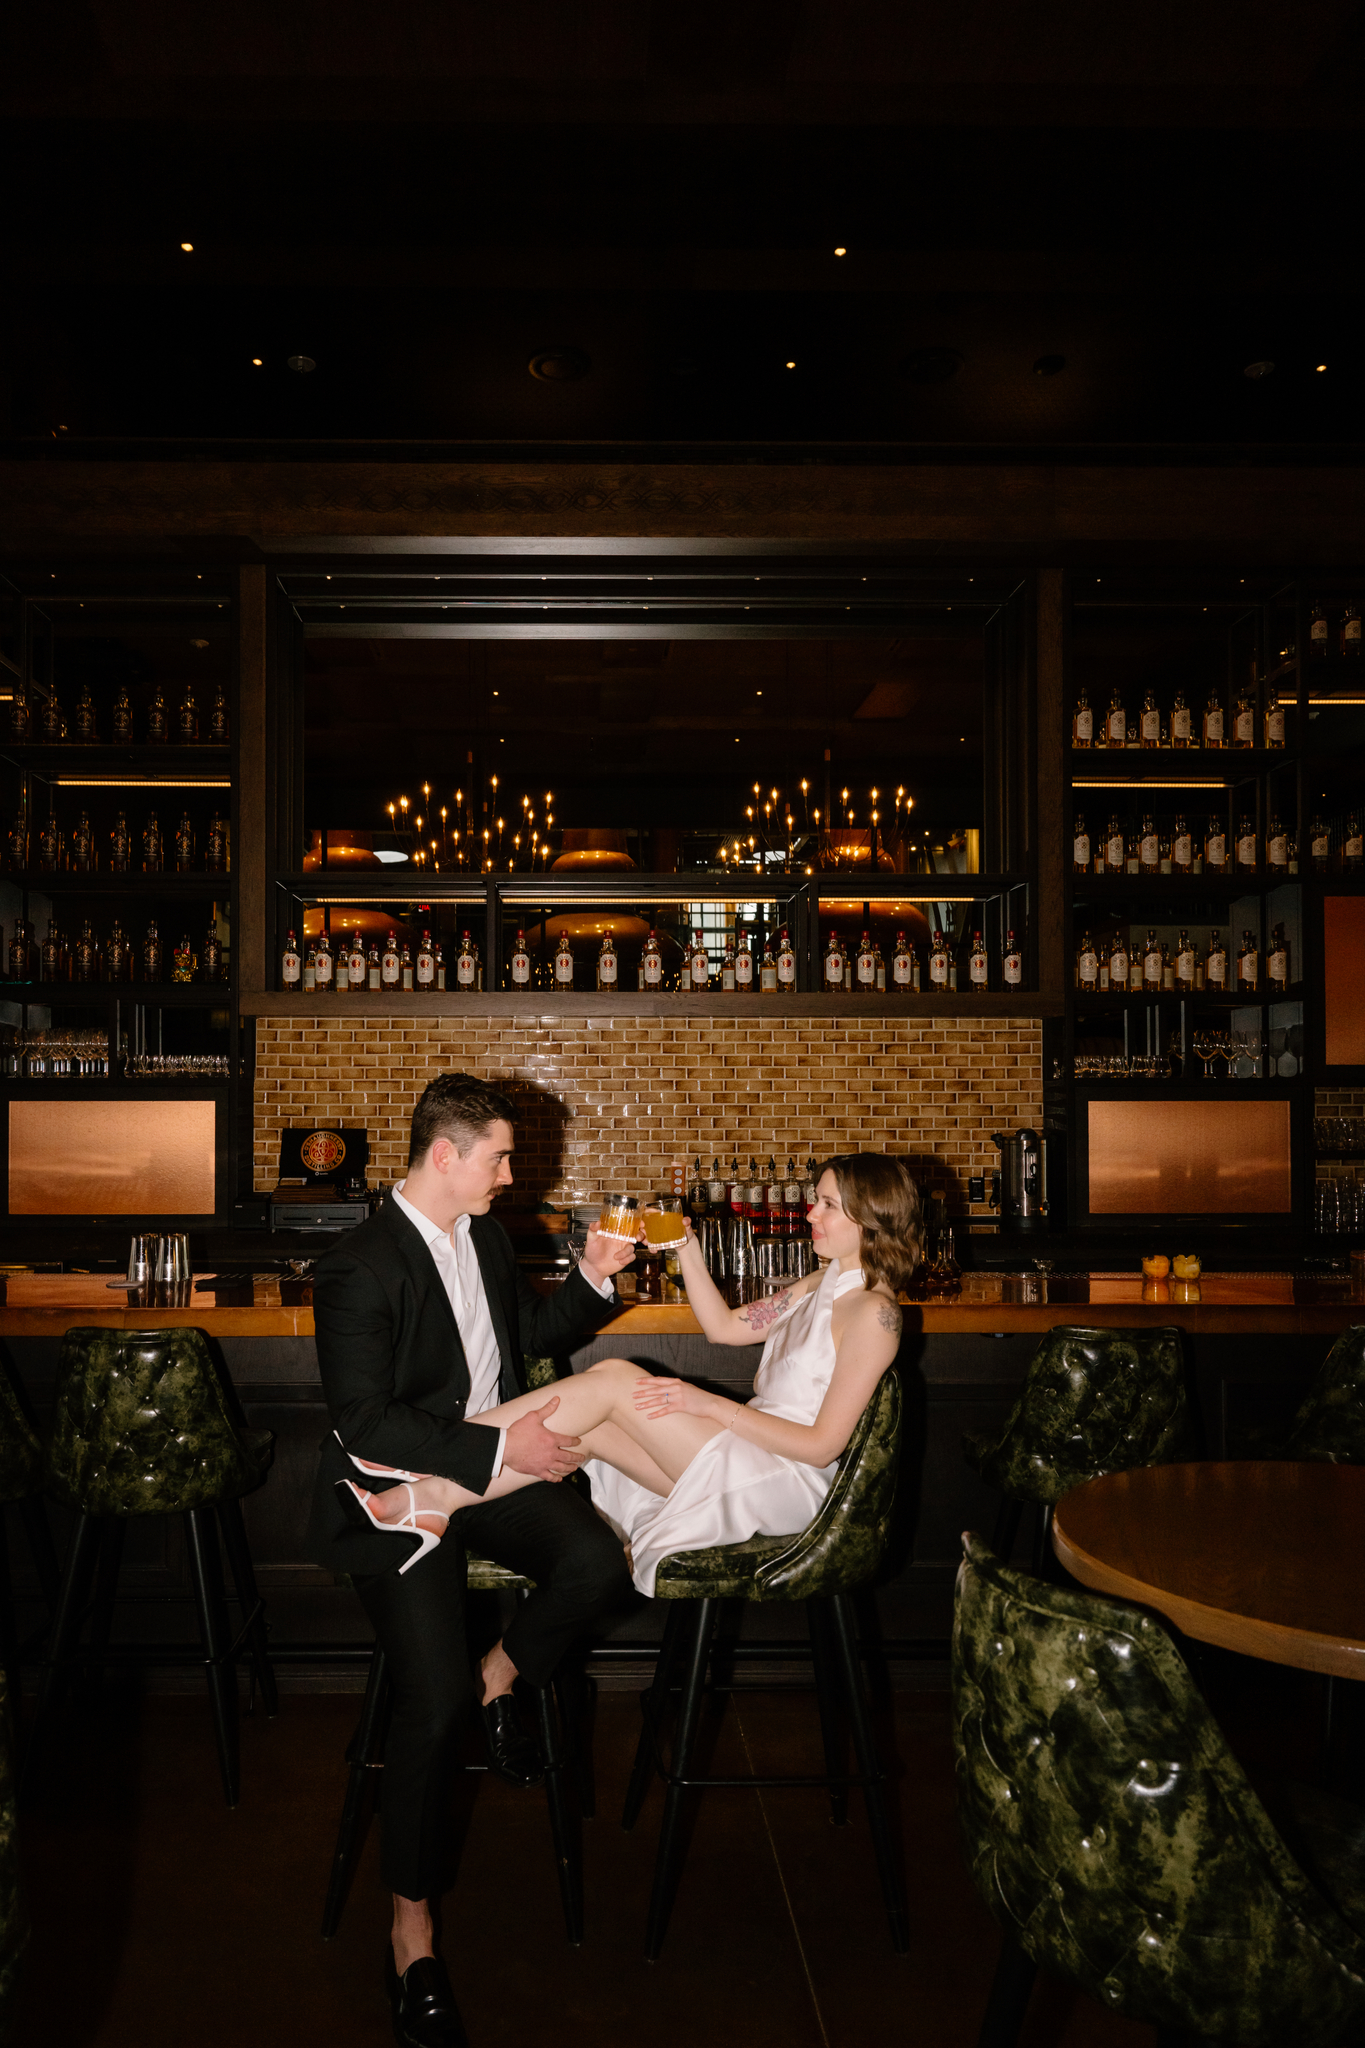 Couple sitting at a nice bar. He is wearing a black suit and she is wearing a long white dress.